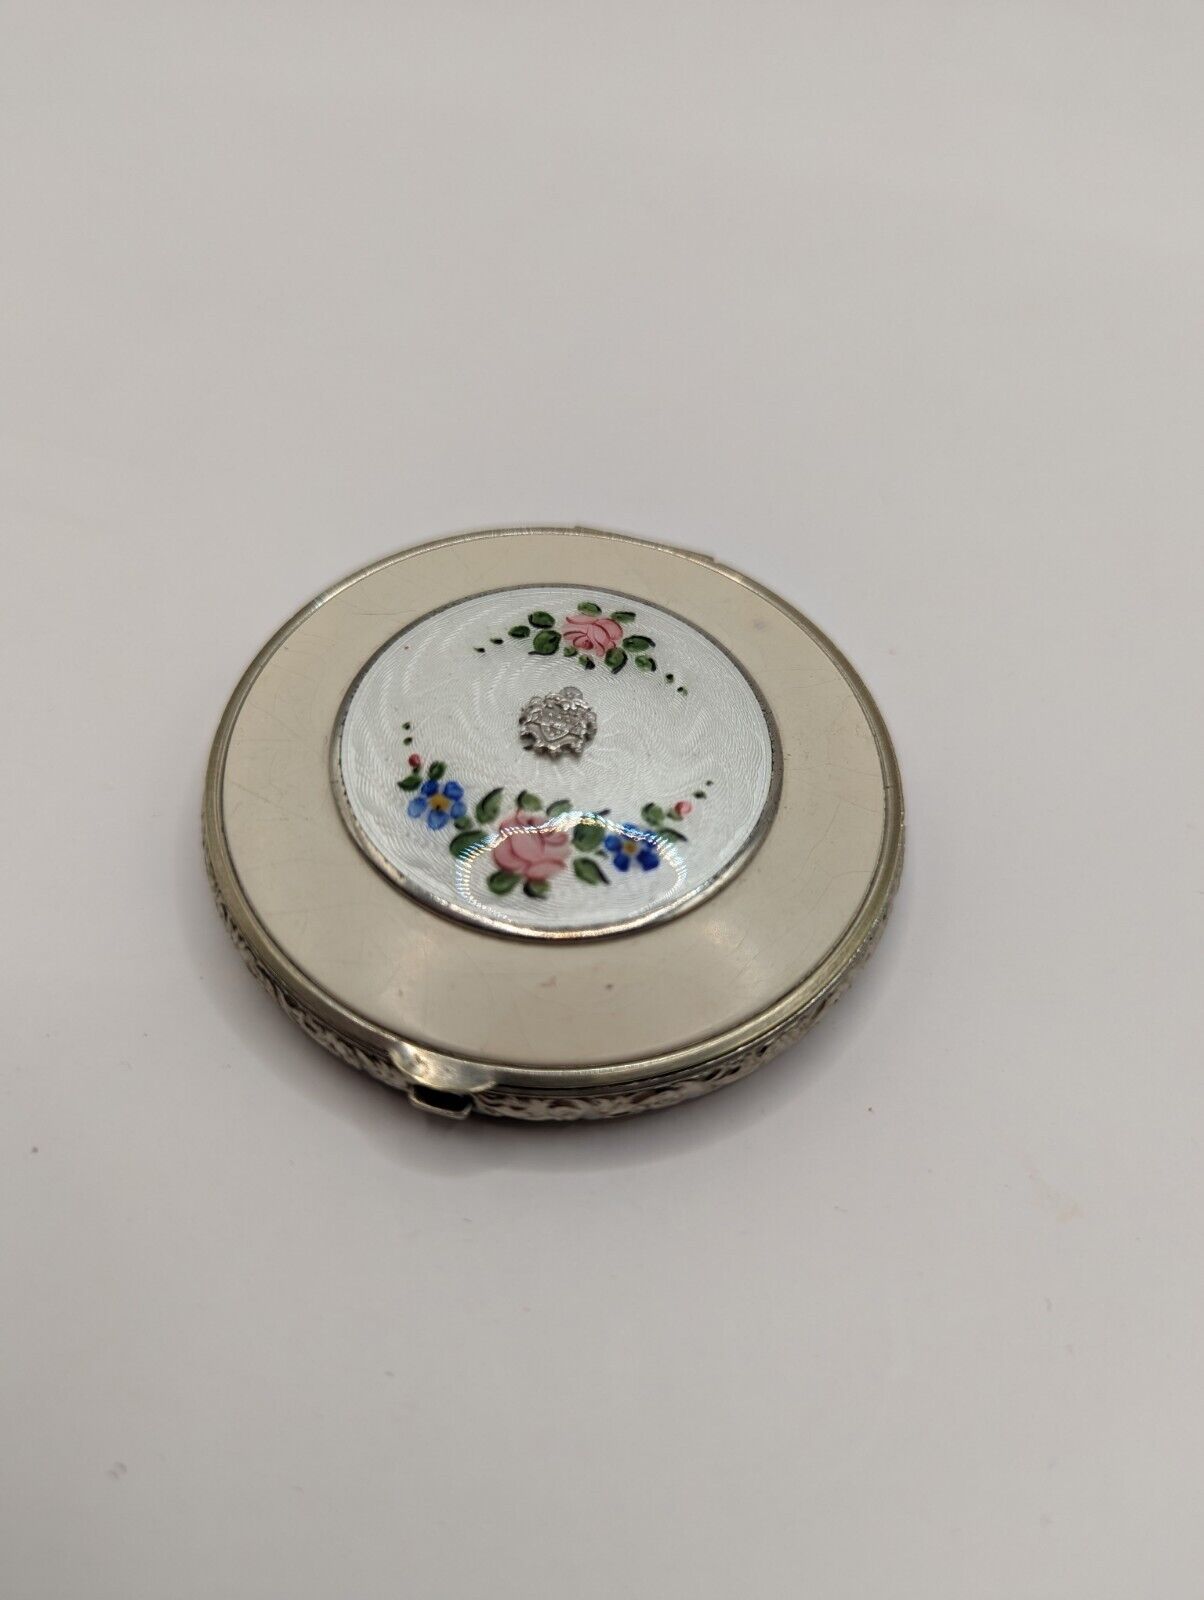 Vintage 1930s Silver And Guilloche Enamel Rose Decorated Compact